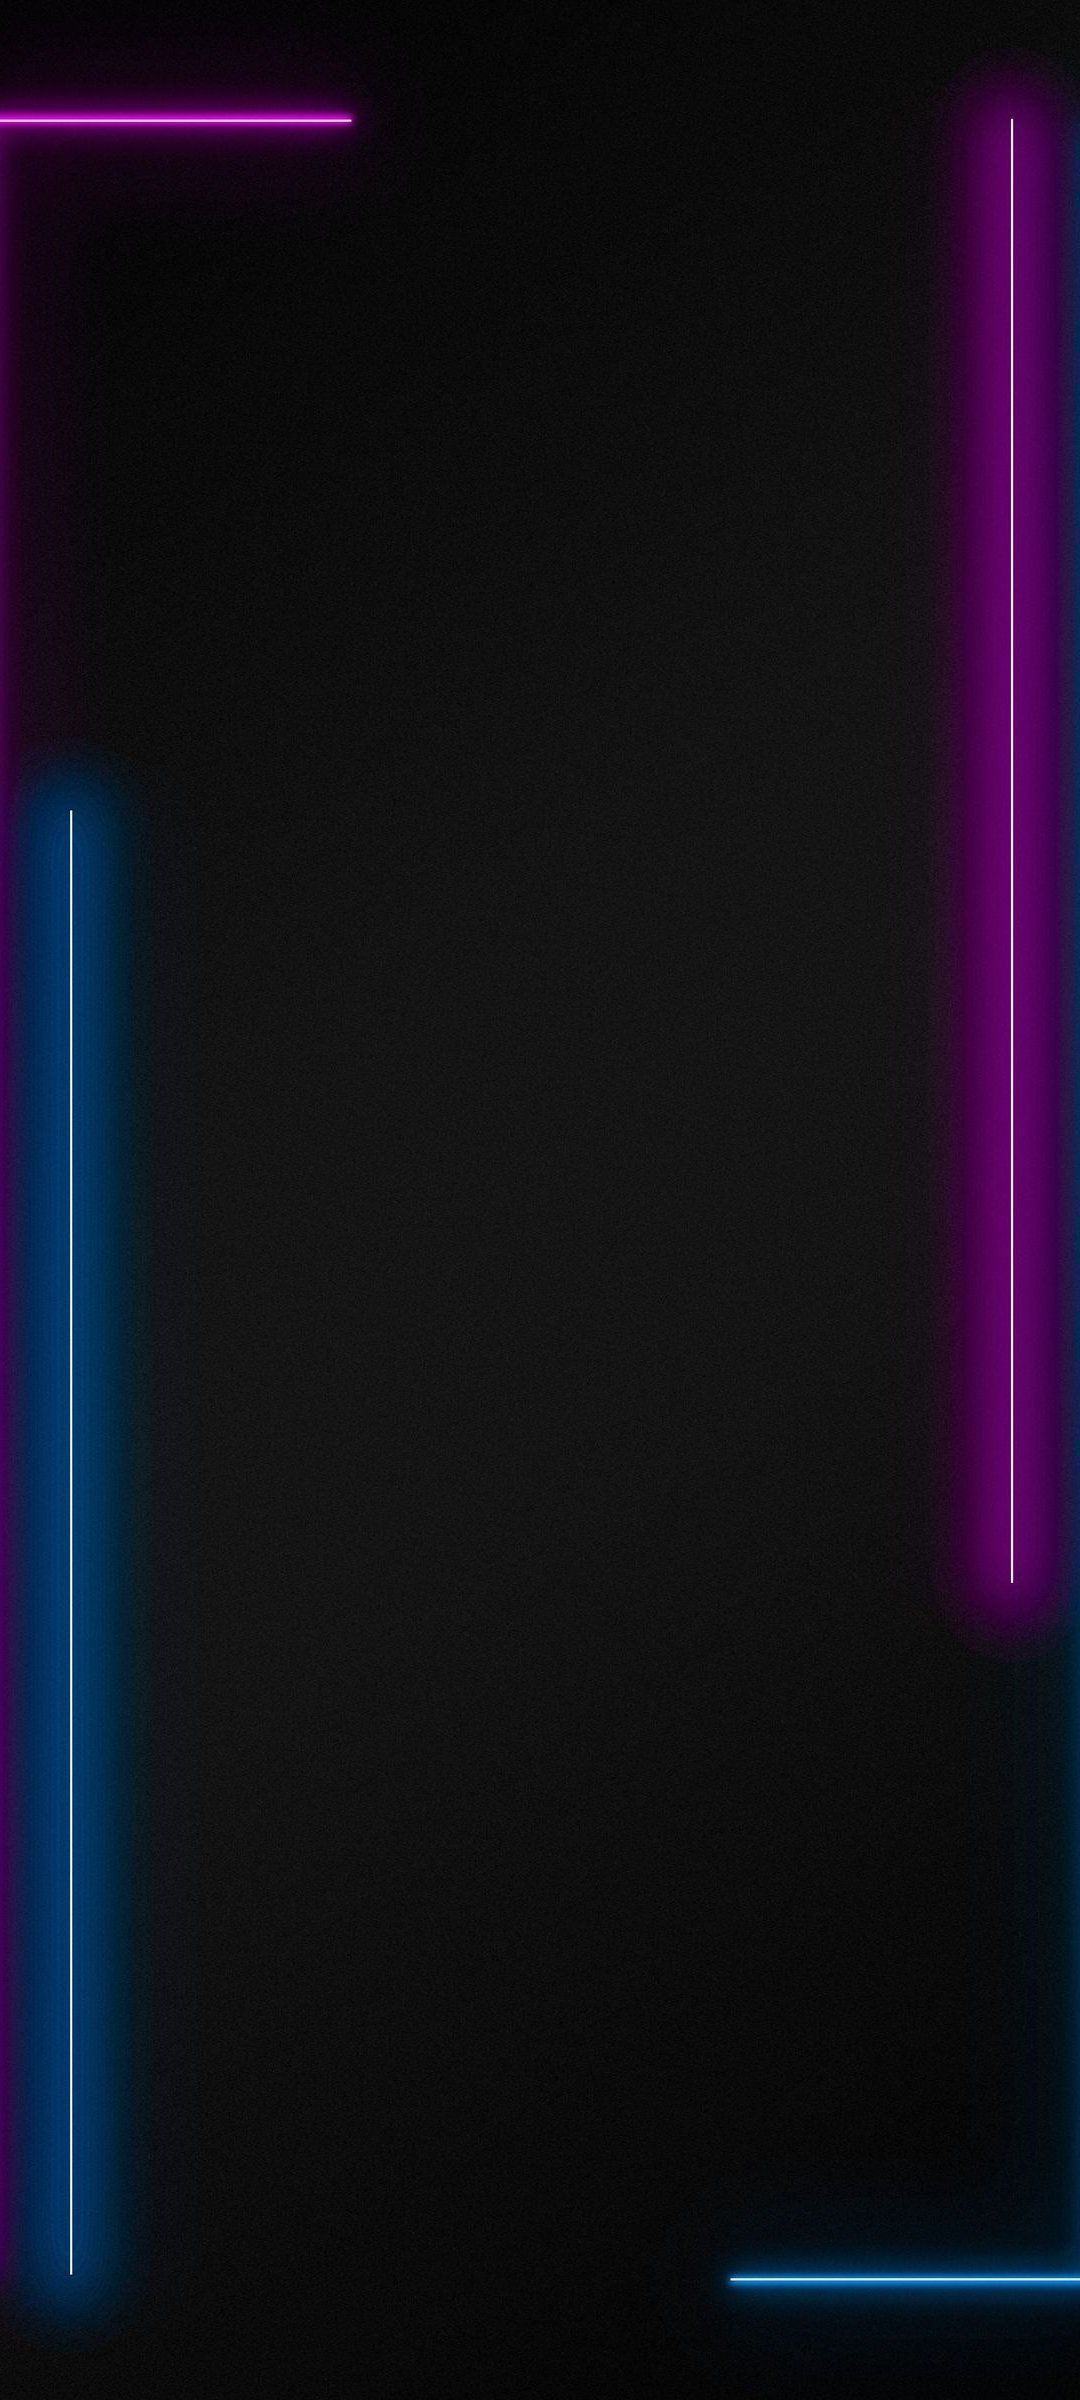 Border Neon Amoled Black Wallpaper – S32 - Chill-out Wallpapers